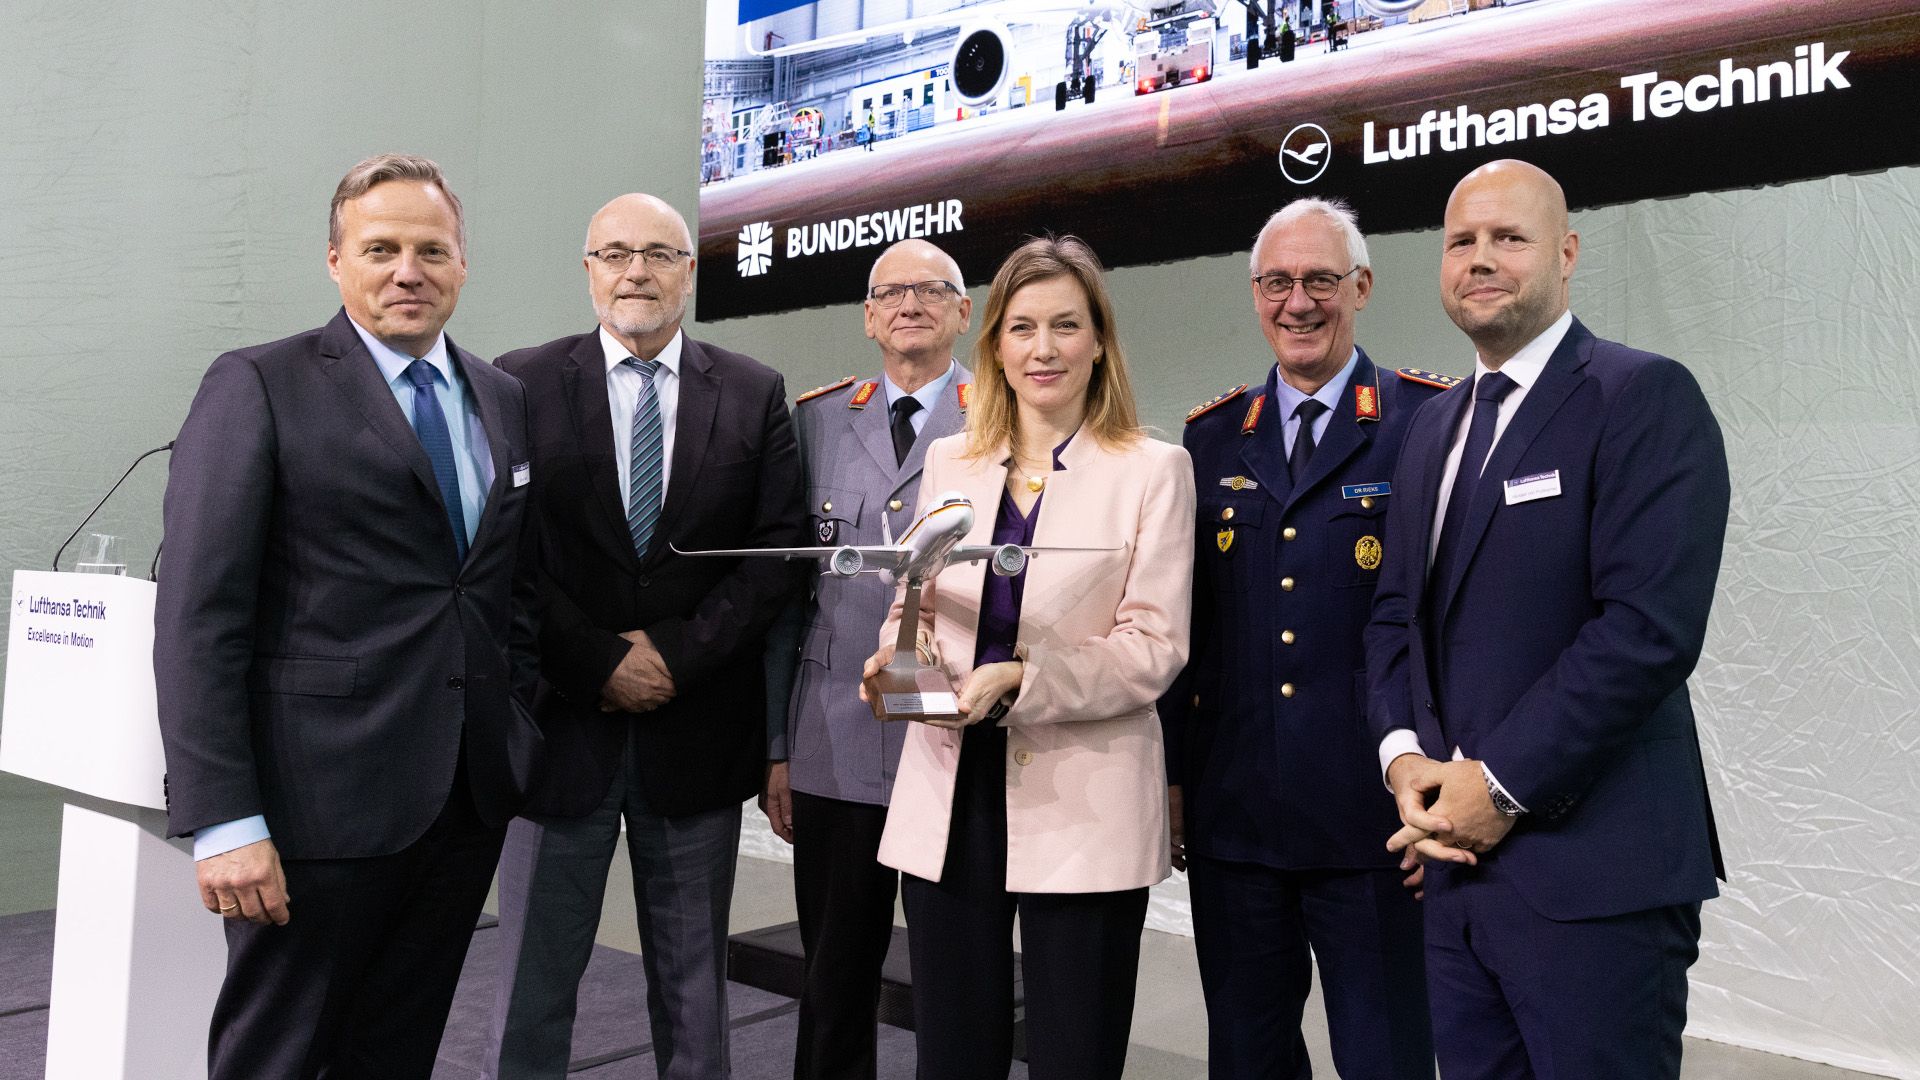 Lufthansa technik hands over the first A350 fully fitted out